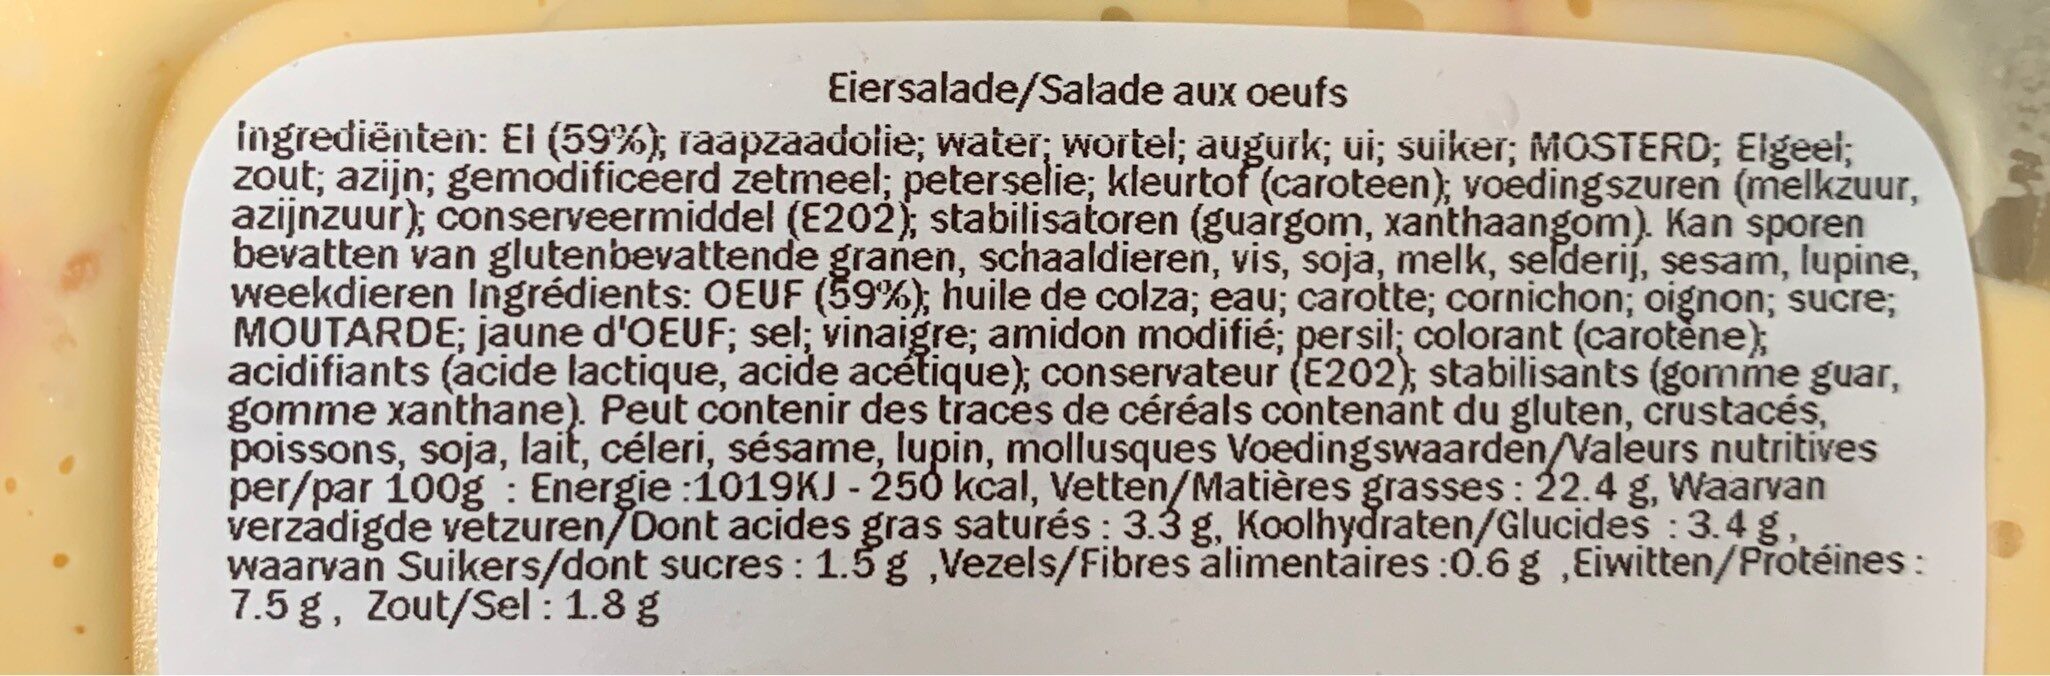 Salade aux oeufs - Nutrition facts - fr